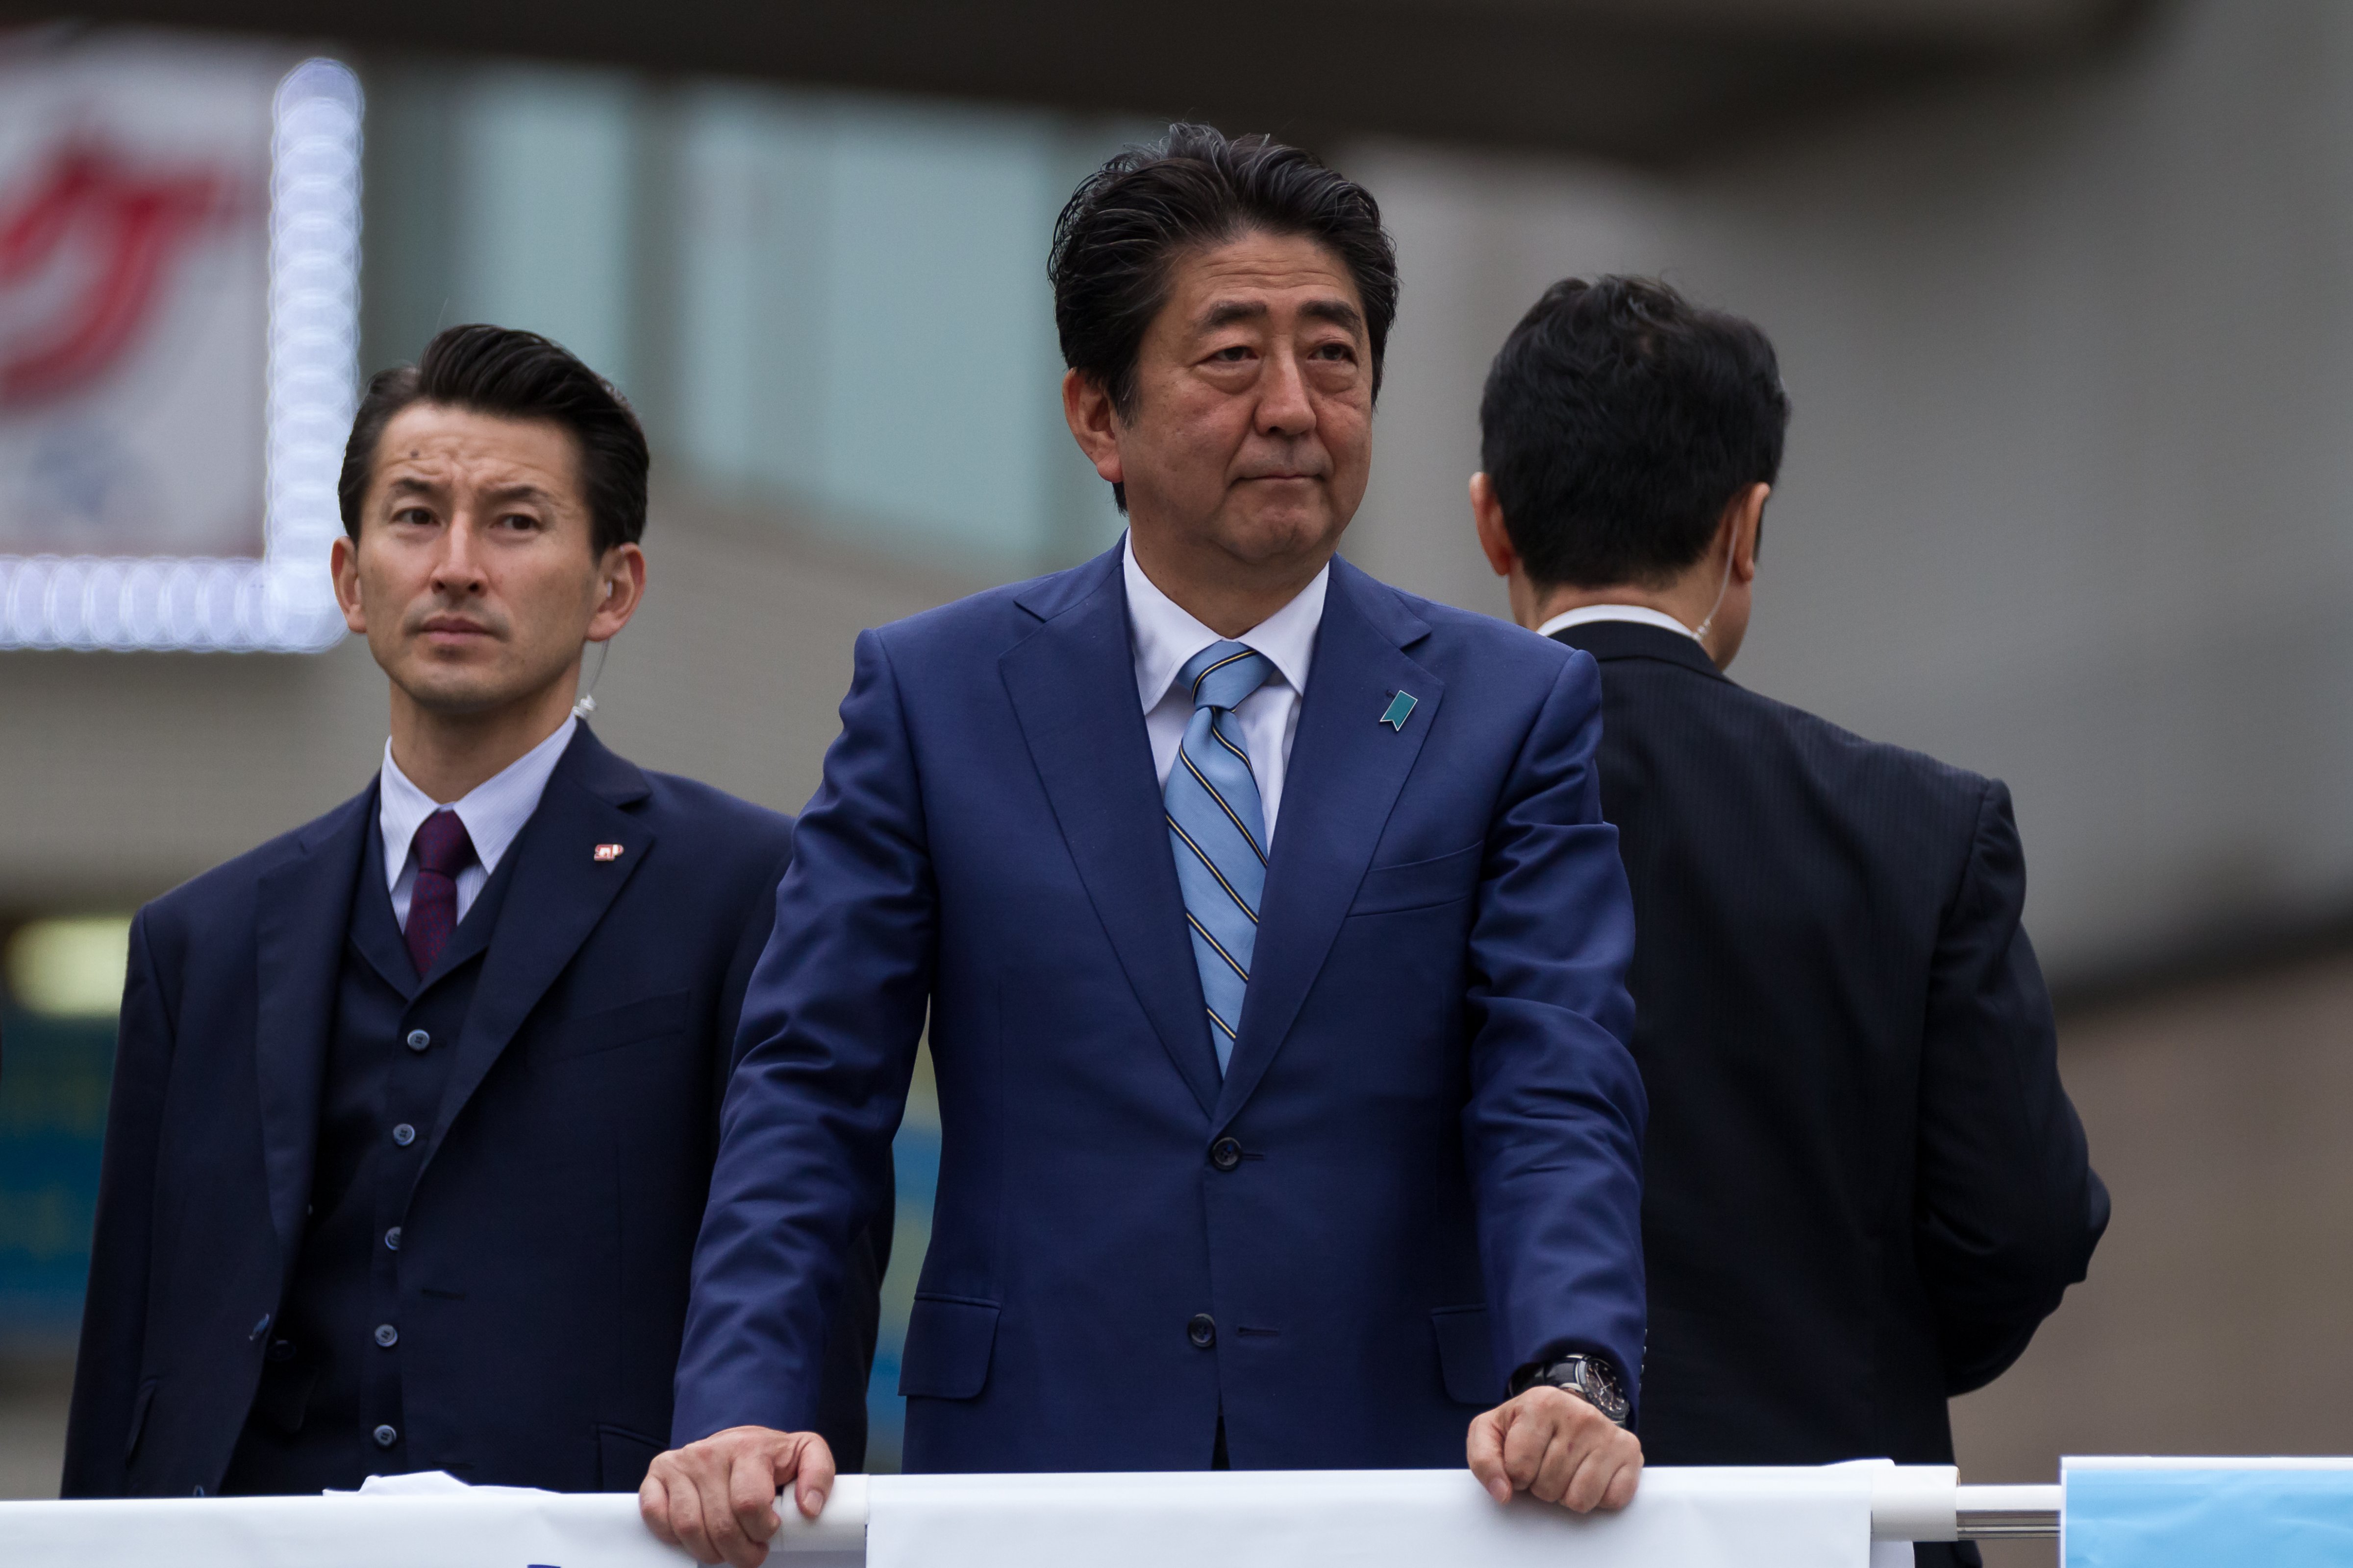 Japanese Prime Minister, Shinzo Abe electioneering in support of candidates from the ruling Liberal Democratic Party Hon Atsugi on Oct. 20 2017 in Kanagawa, Japan. (Damon Coulter—Barcroft Images/Barcroft Media/Getty Images)